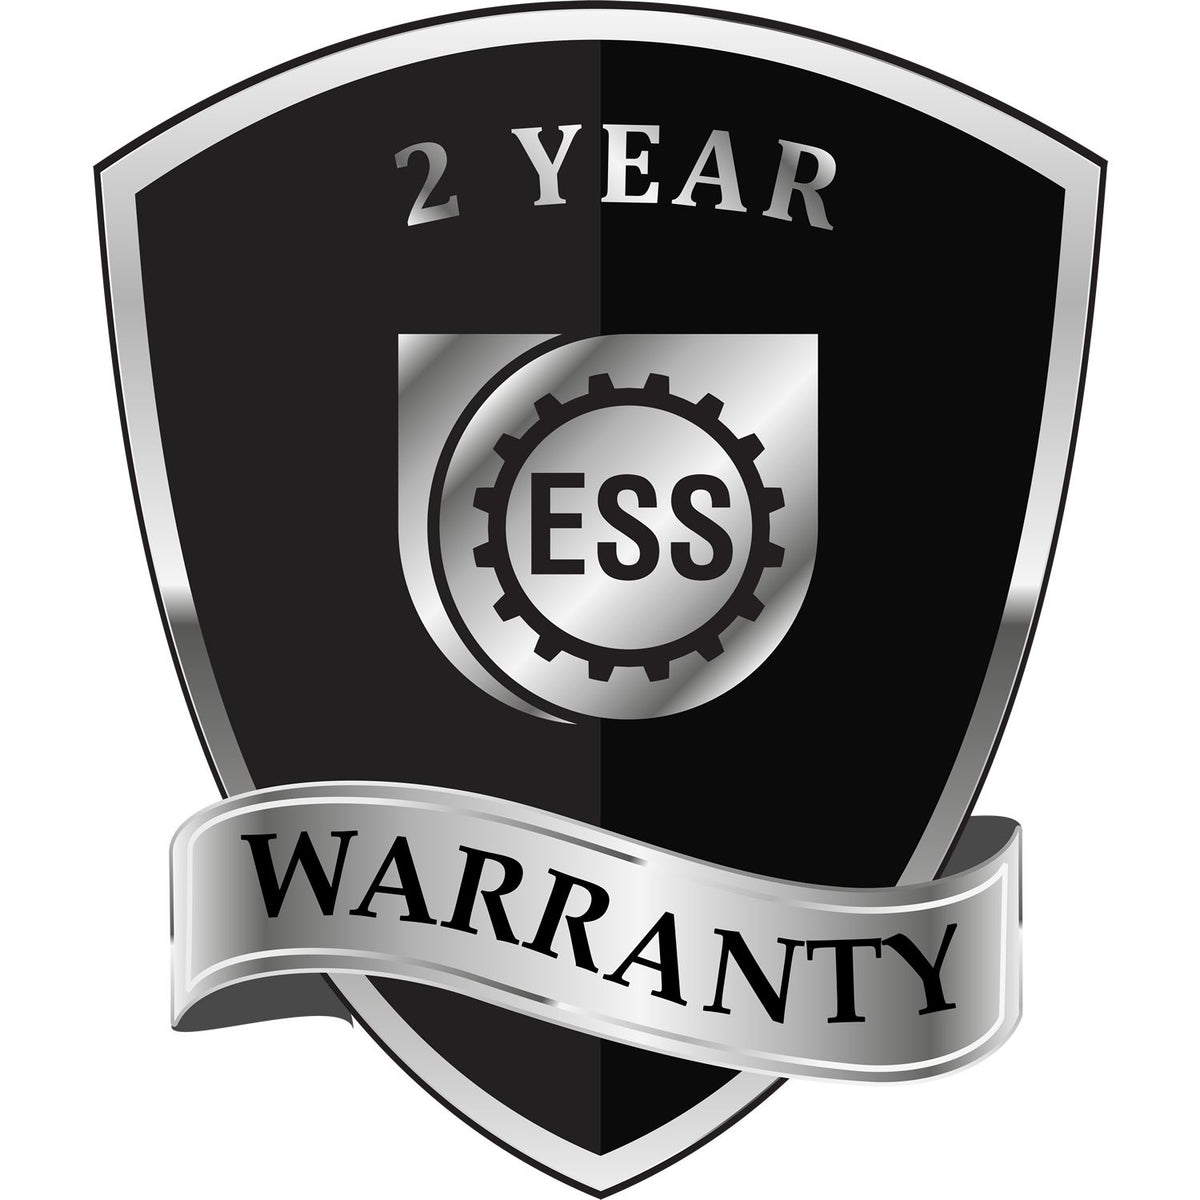 A badge or emblem showing a warranty icon for the Heavy Duty Cast Iron Nebraska Engineer Seal Embosser